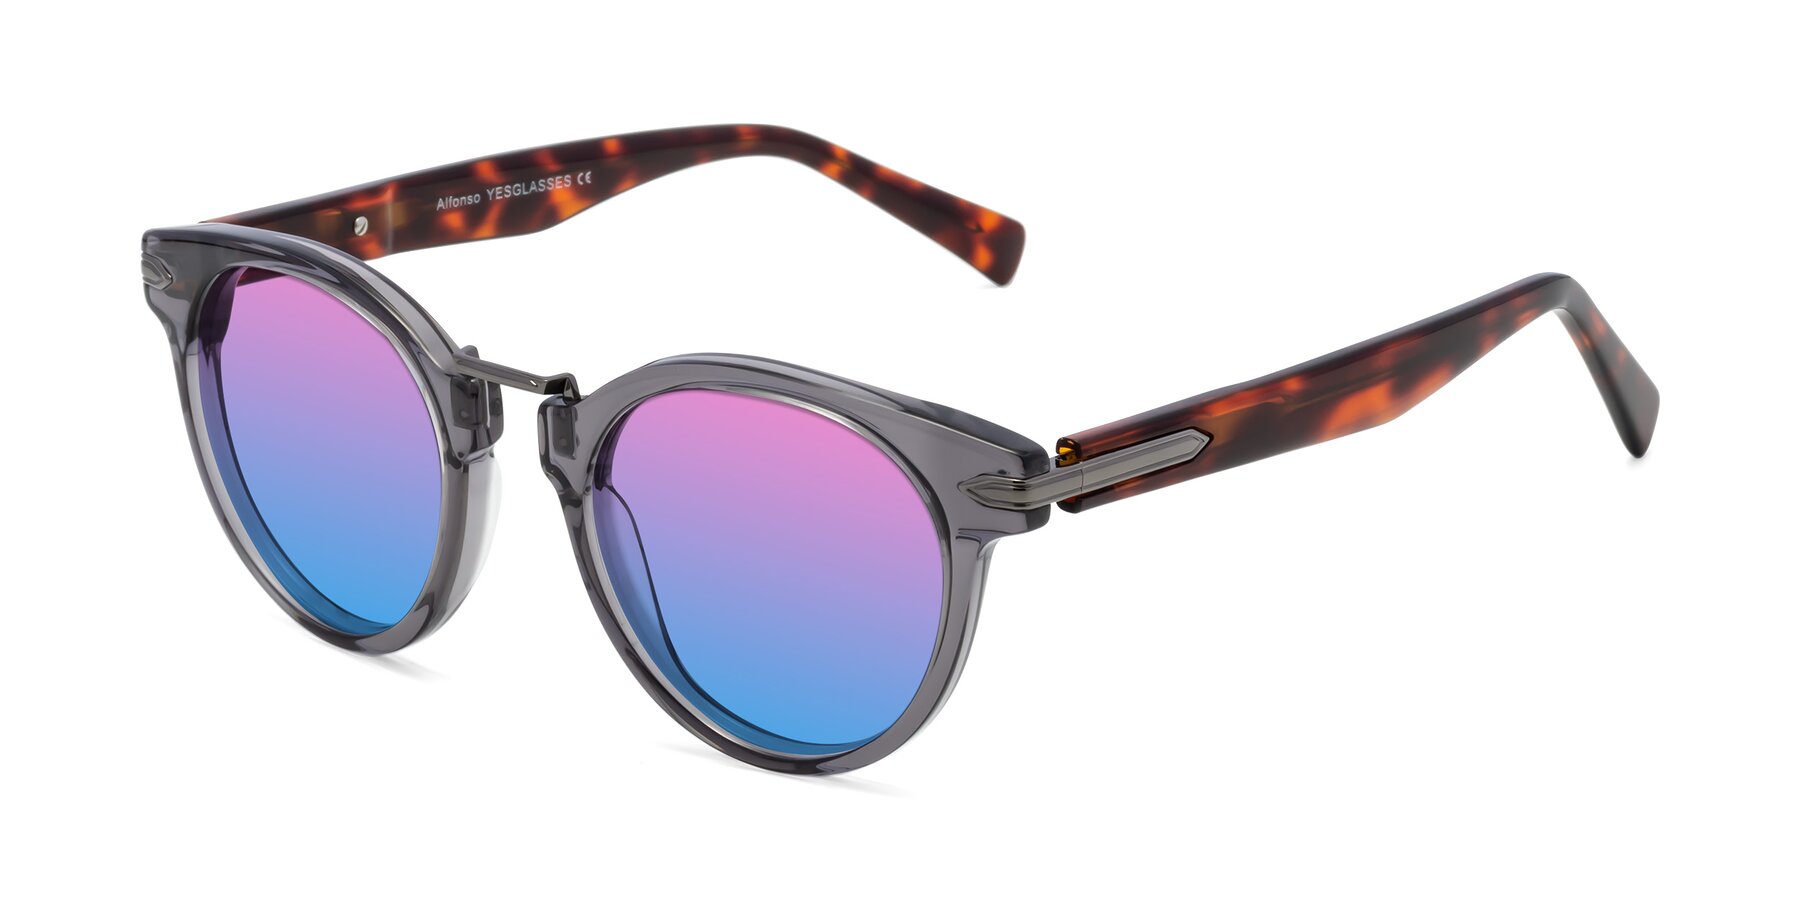 Angle of Alfonso in Gray /Tortoise with Pink / Blue Gradient Lenses